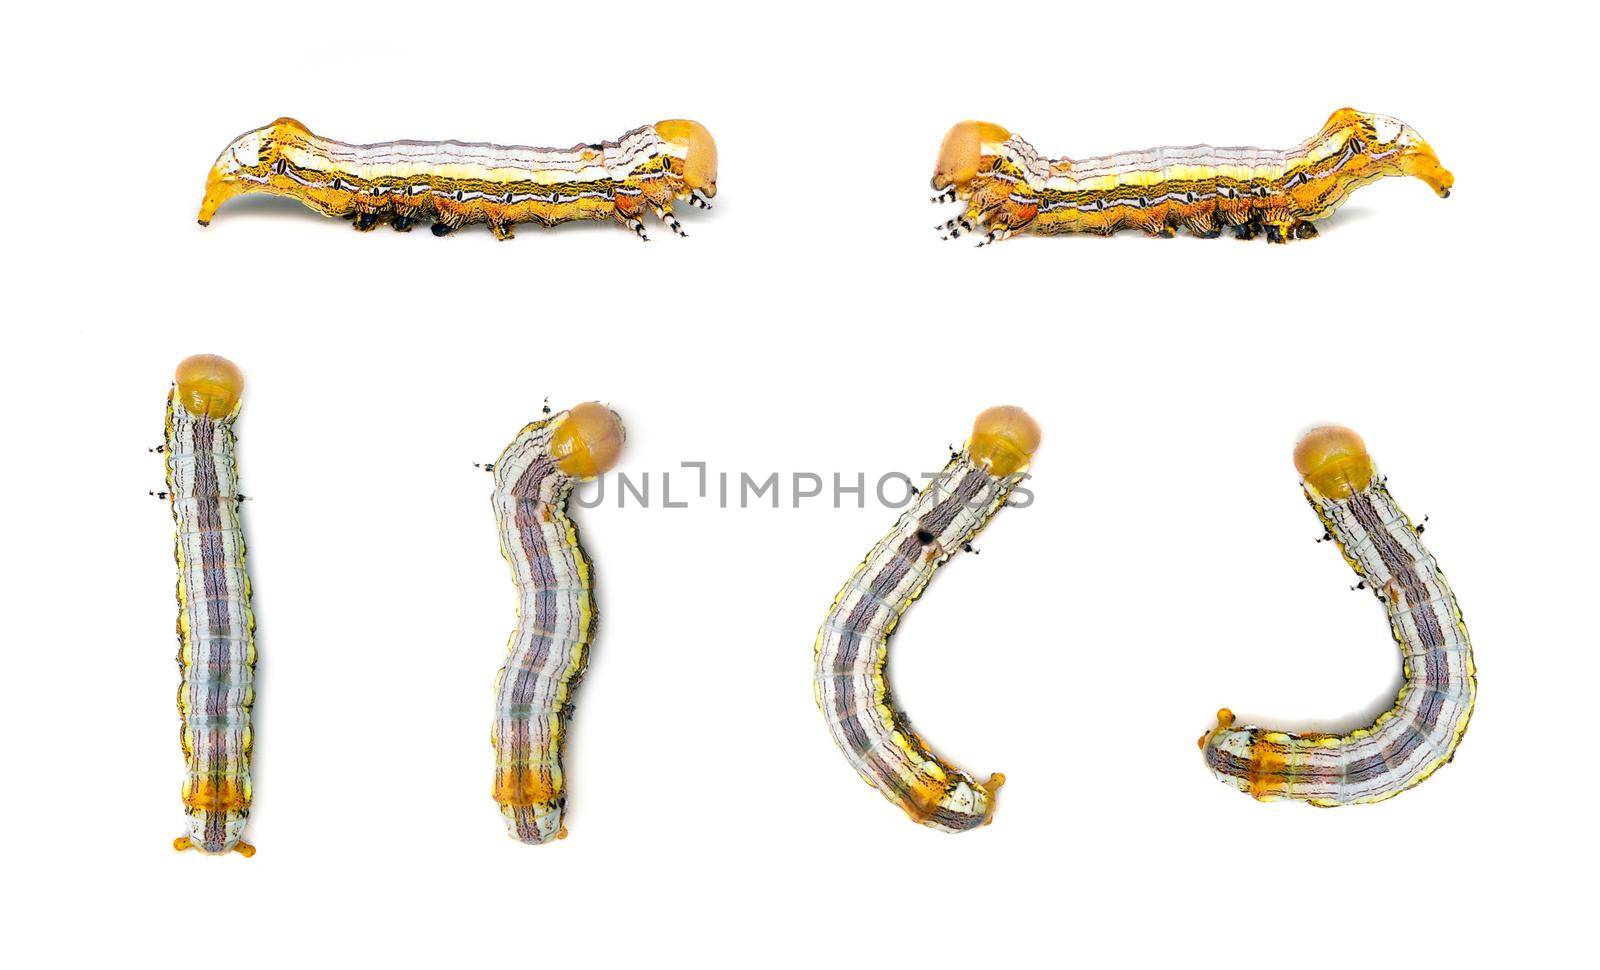 Group of yellow-headed butterfly caterpillars isolated on white background. Animal. Insect. by yod67